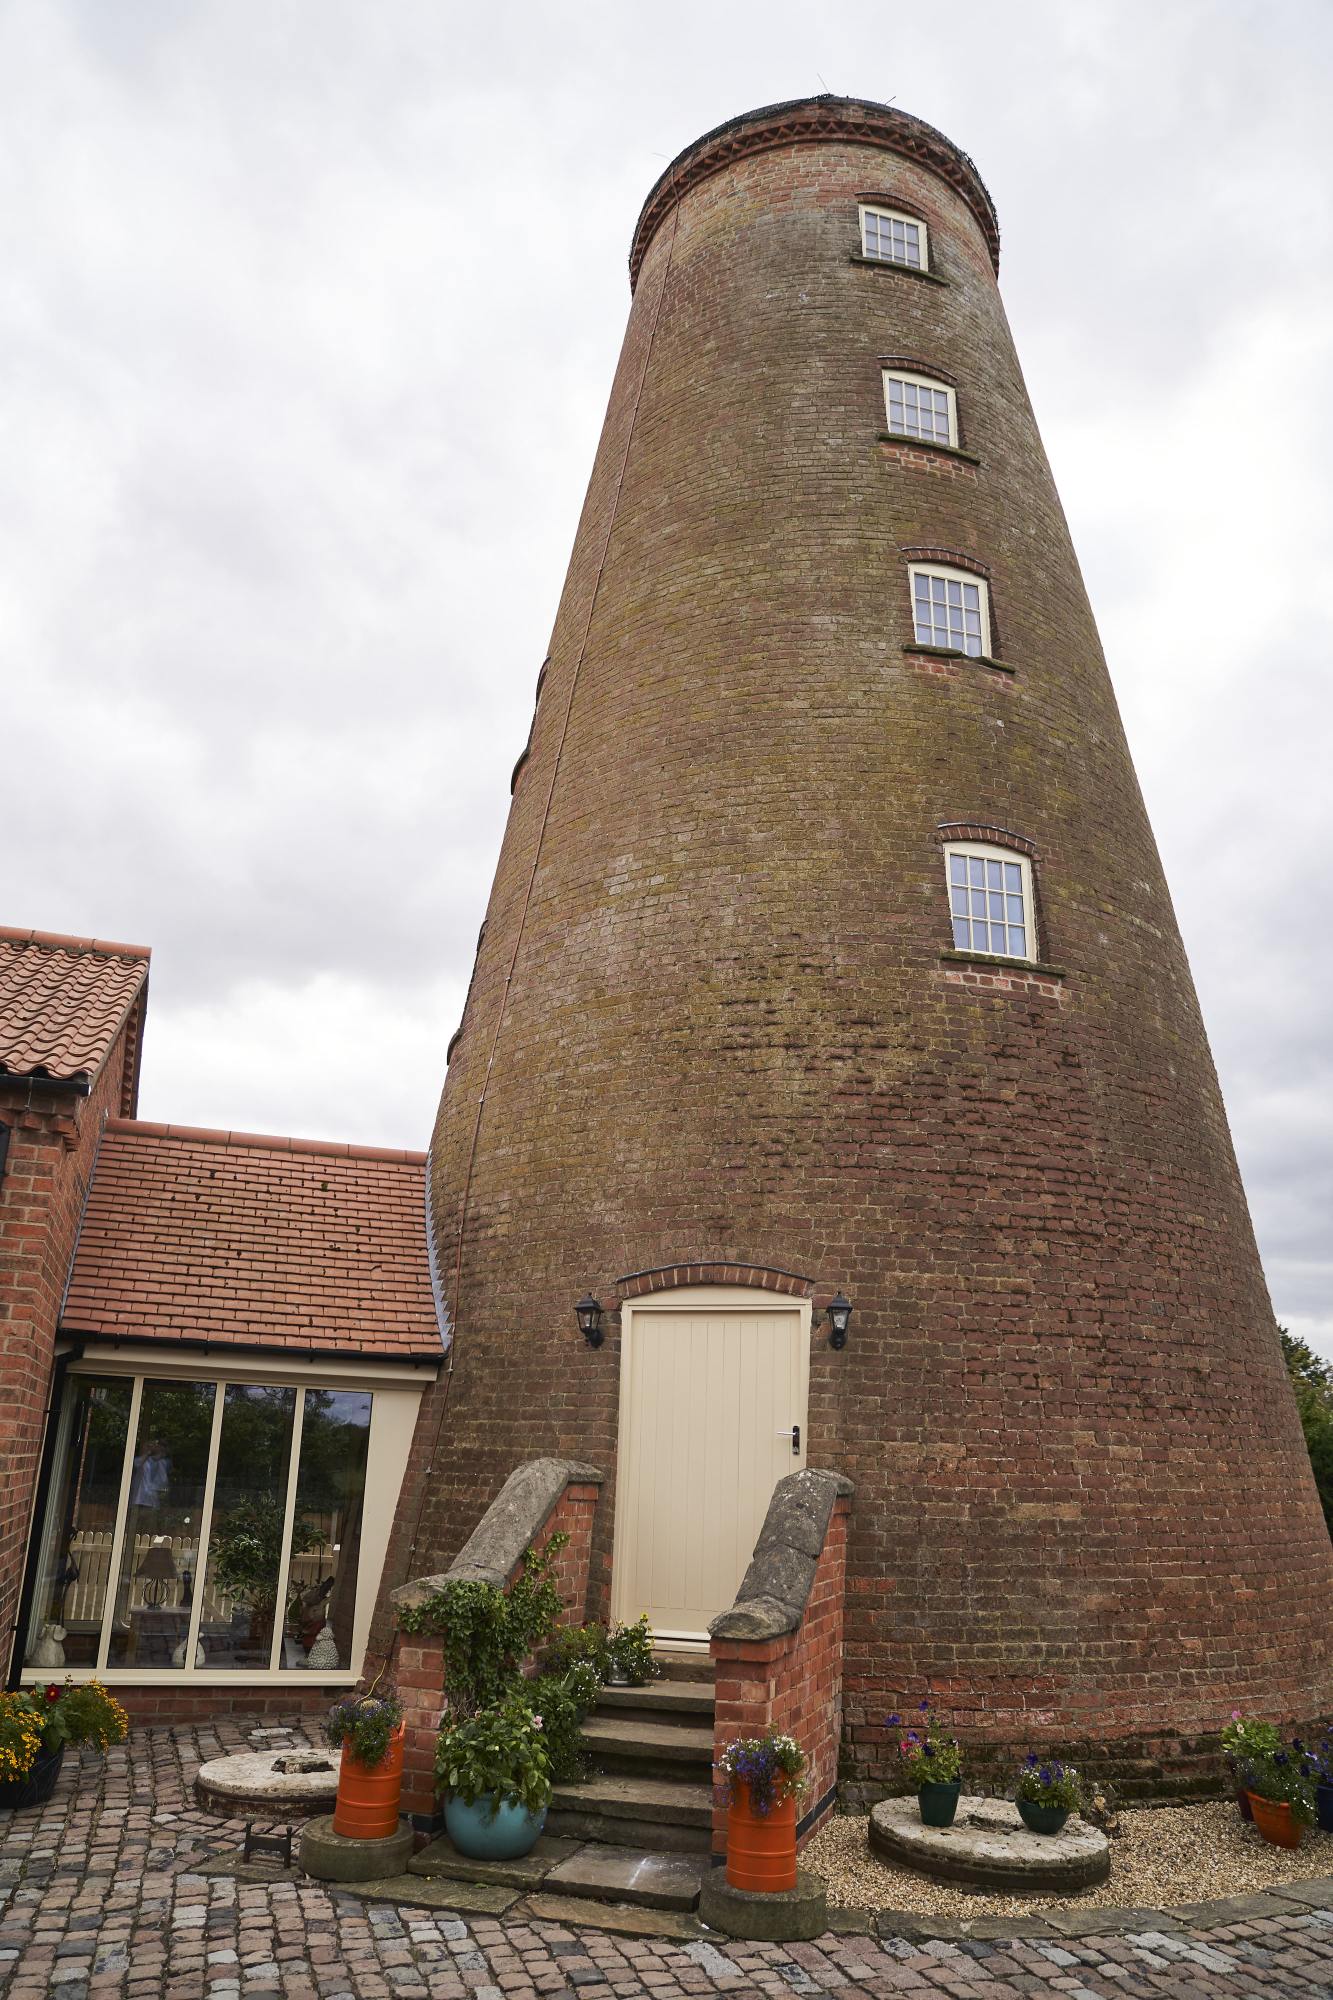 A converted windmill